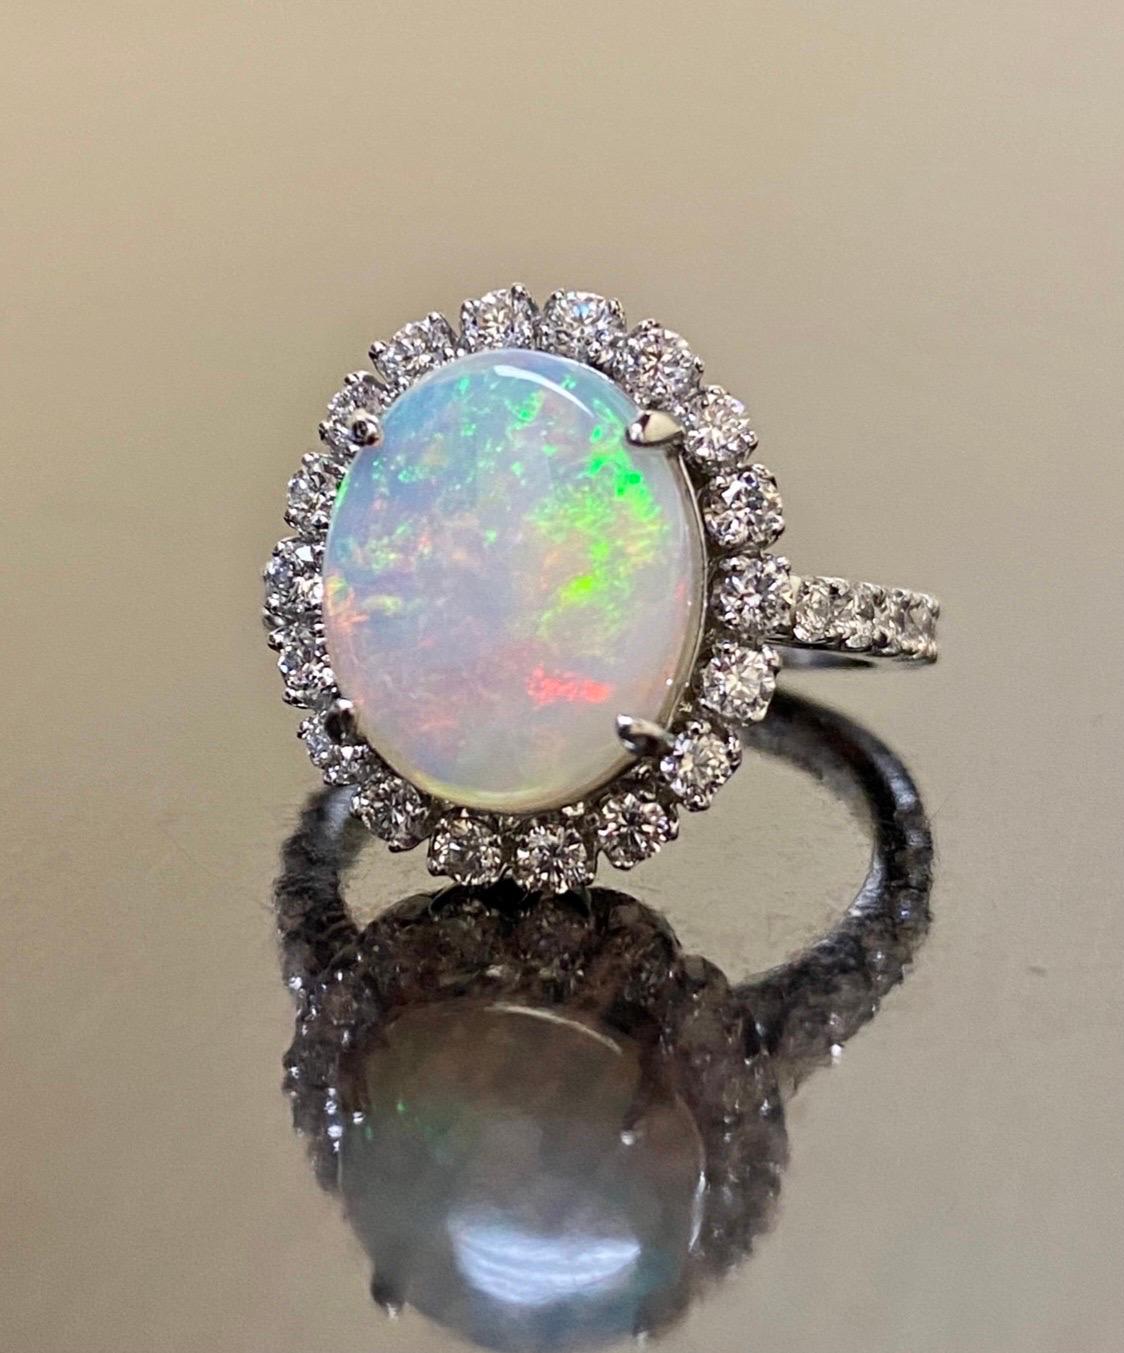 DeKara Designs Collection

Our latest design! An elegant and lustrous Australian Opal surrounded beautifully by diamonds in a halo setting.

Metal- 90% Platinum, 10% Iridium.

Stones- Genuine Oval Australian Opal 12.30 x 10.0 MM, 30 Round Diamonds